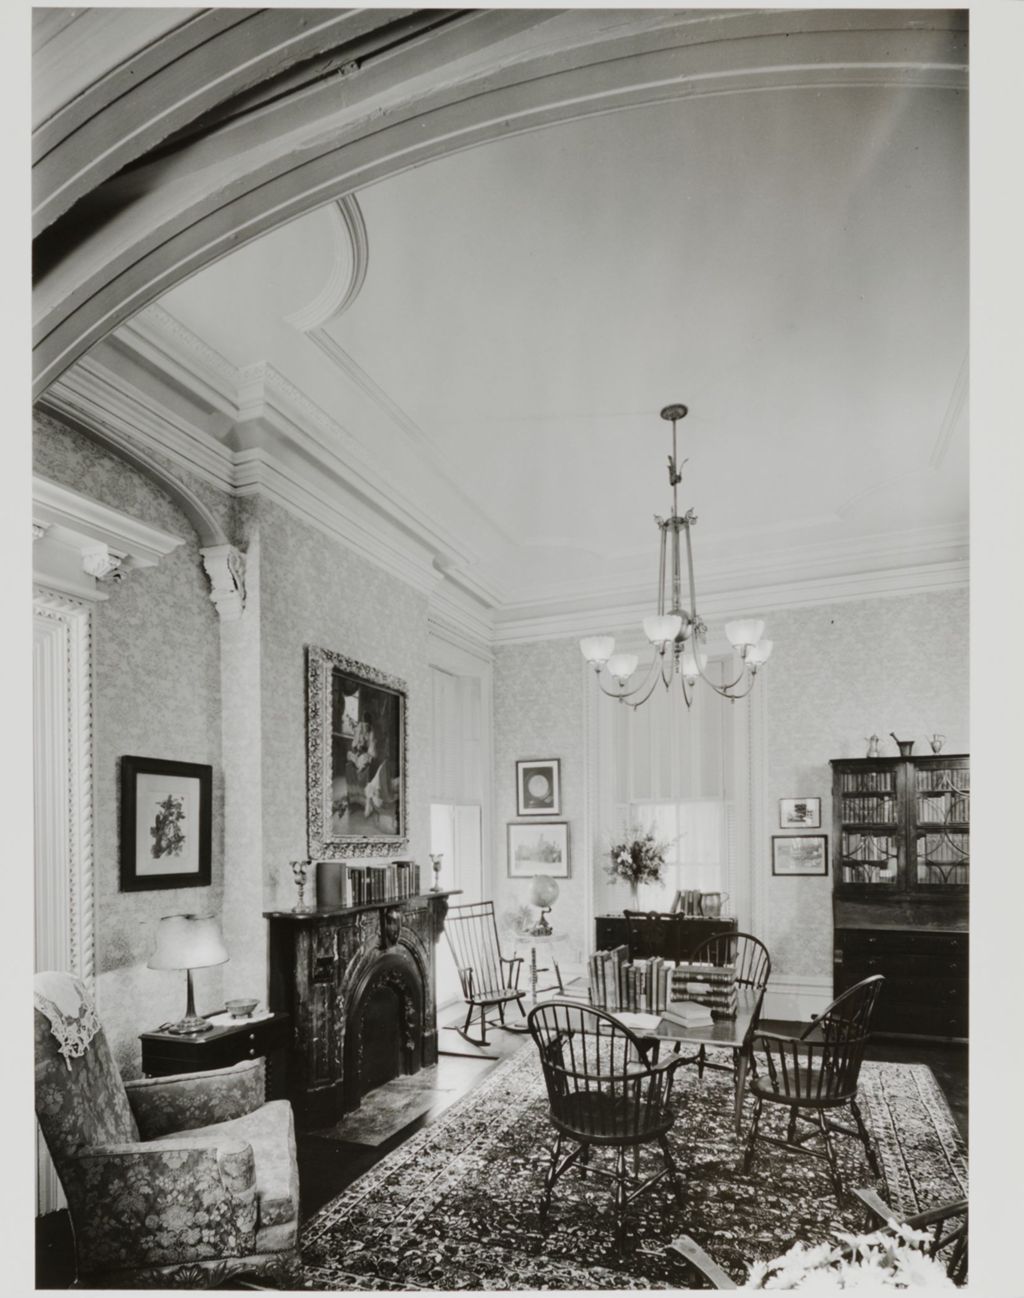 West parlor room prior to restoration, Jane Addams Hull-House Museum